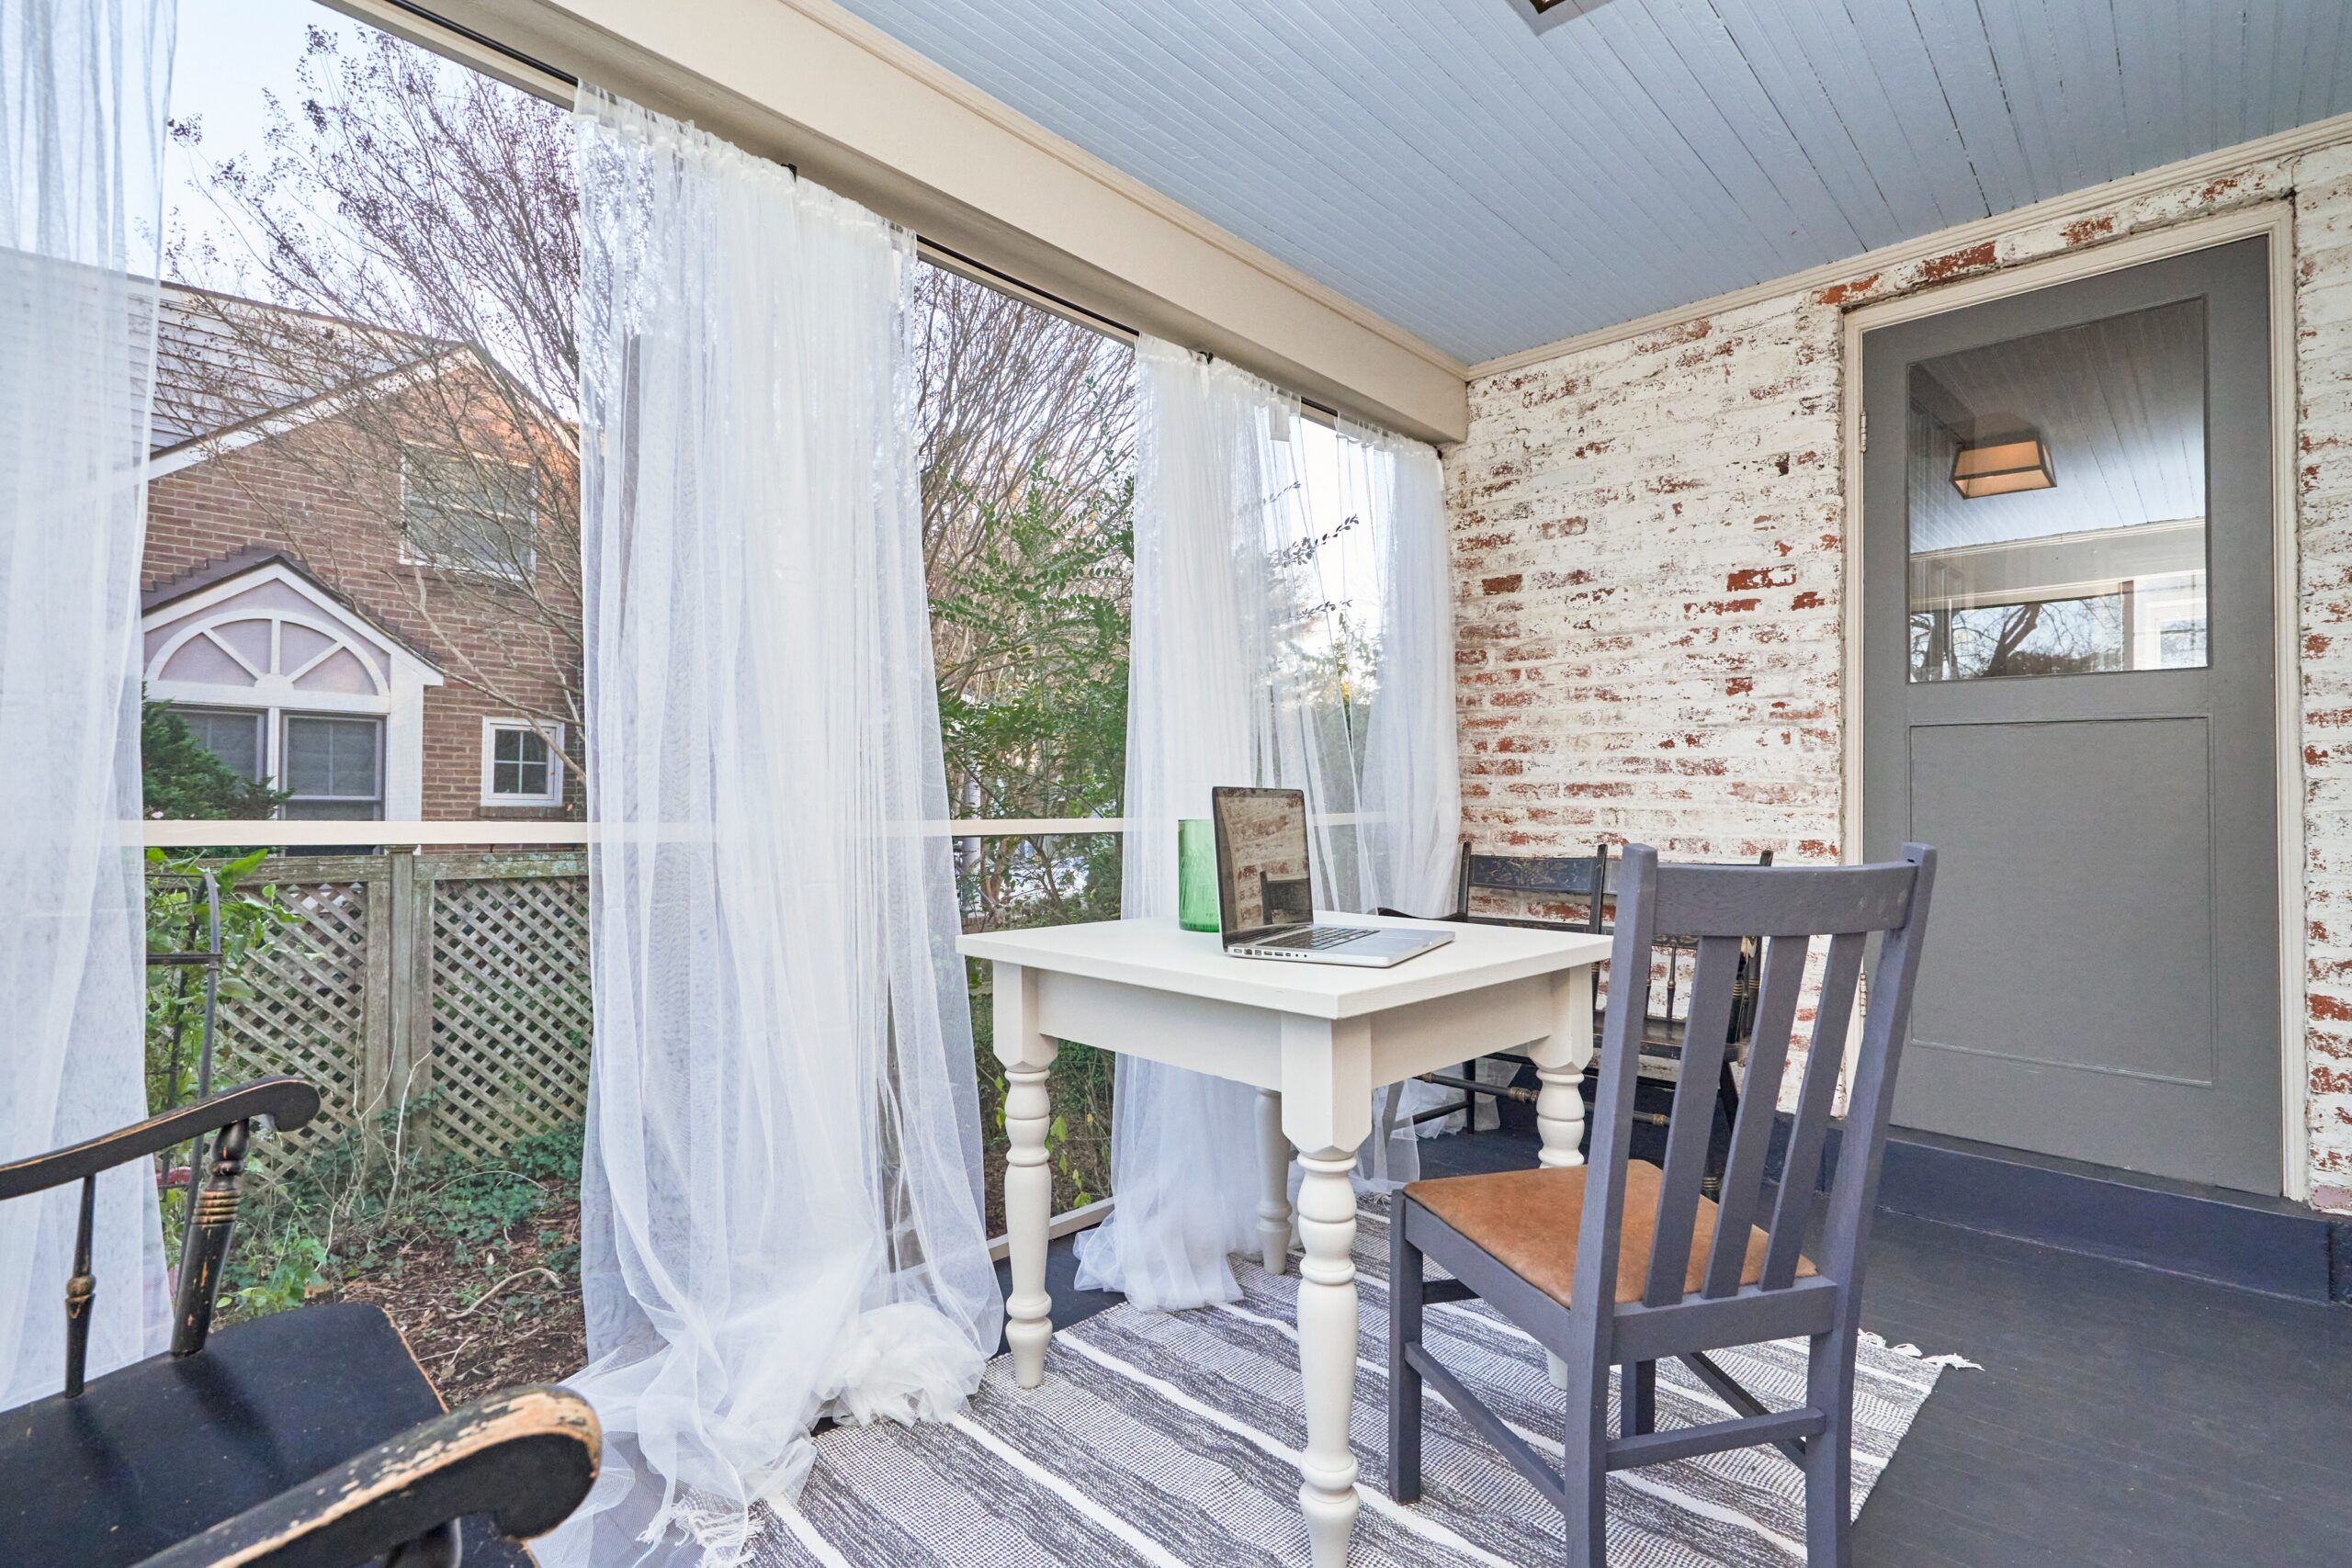 Professional interior photo of 5933 16th St N, Arlington, VA - showing the sunroom with a small desk and billowing gauzy white curtains